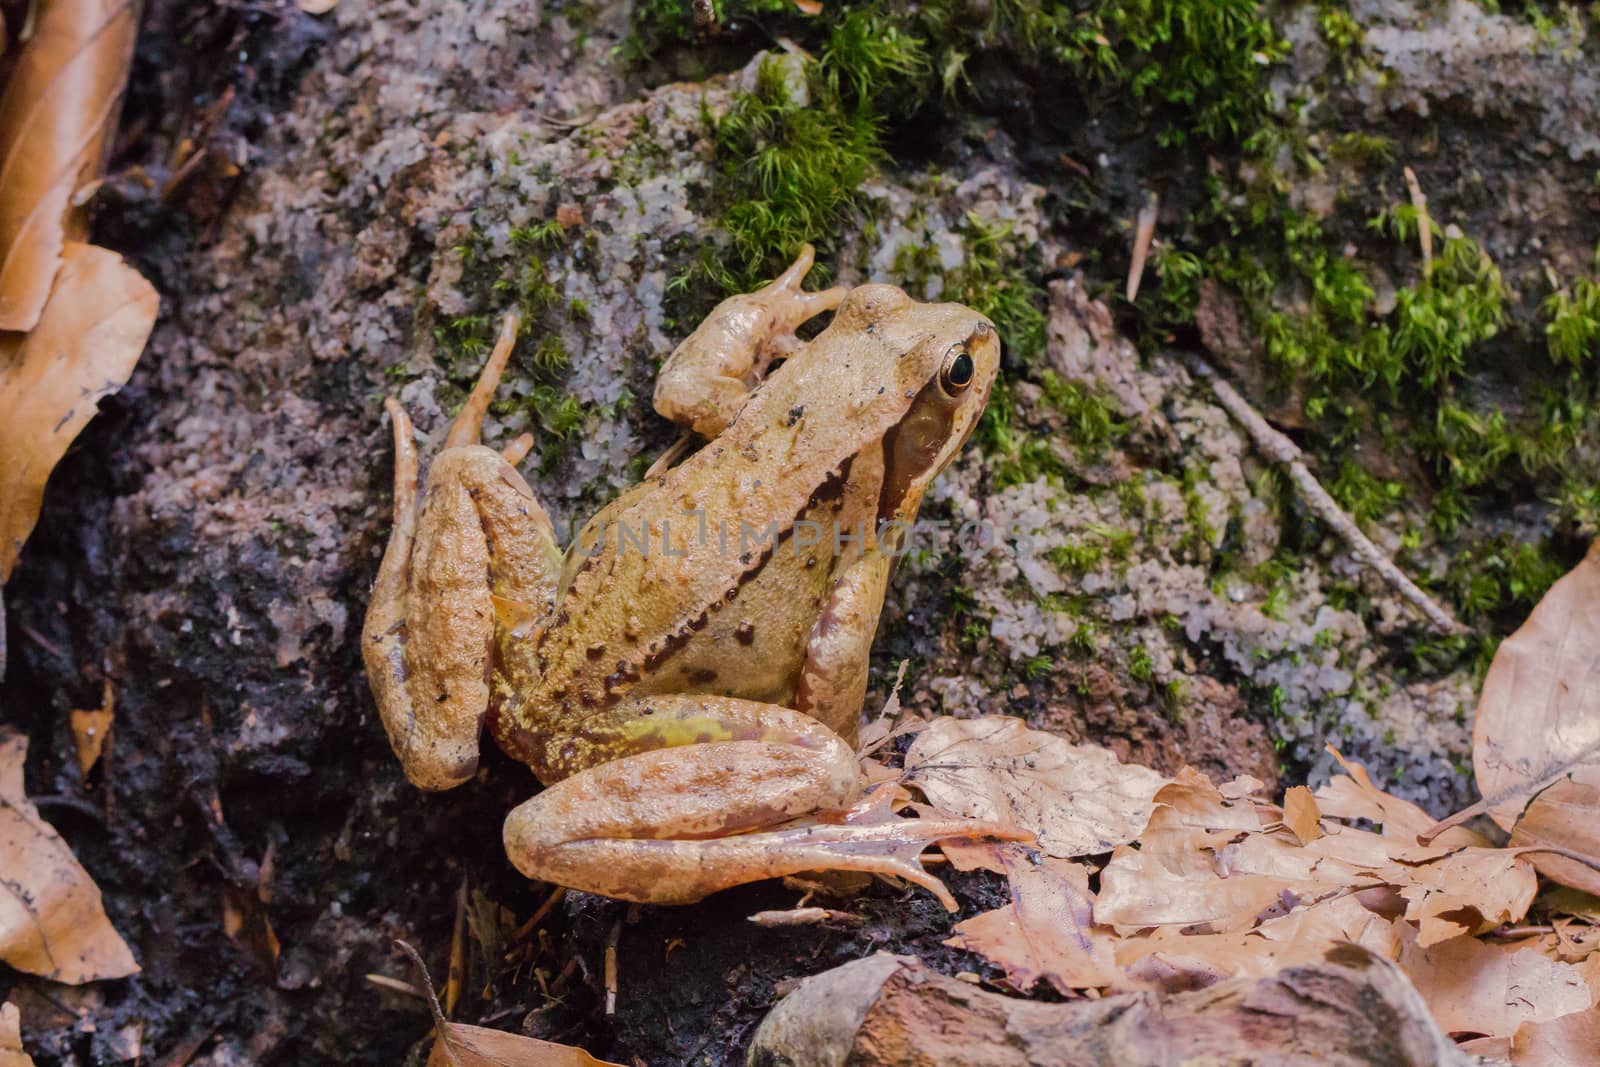 A brown toad sits on the forest floor